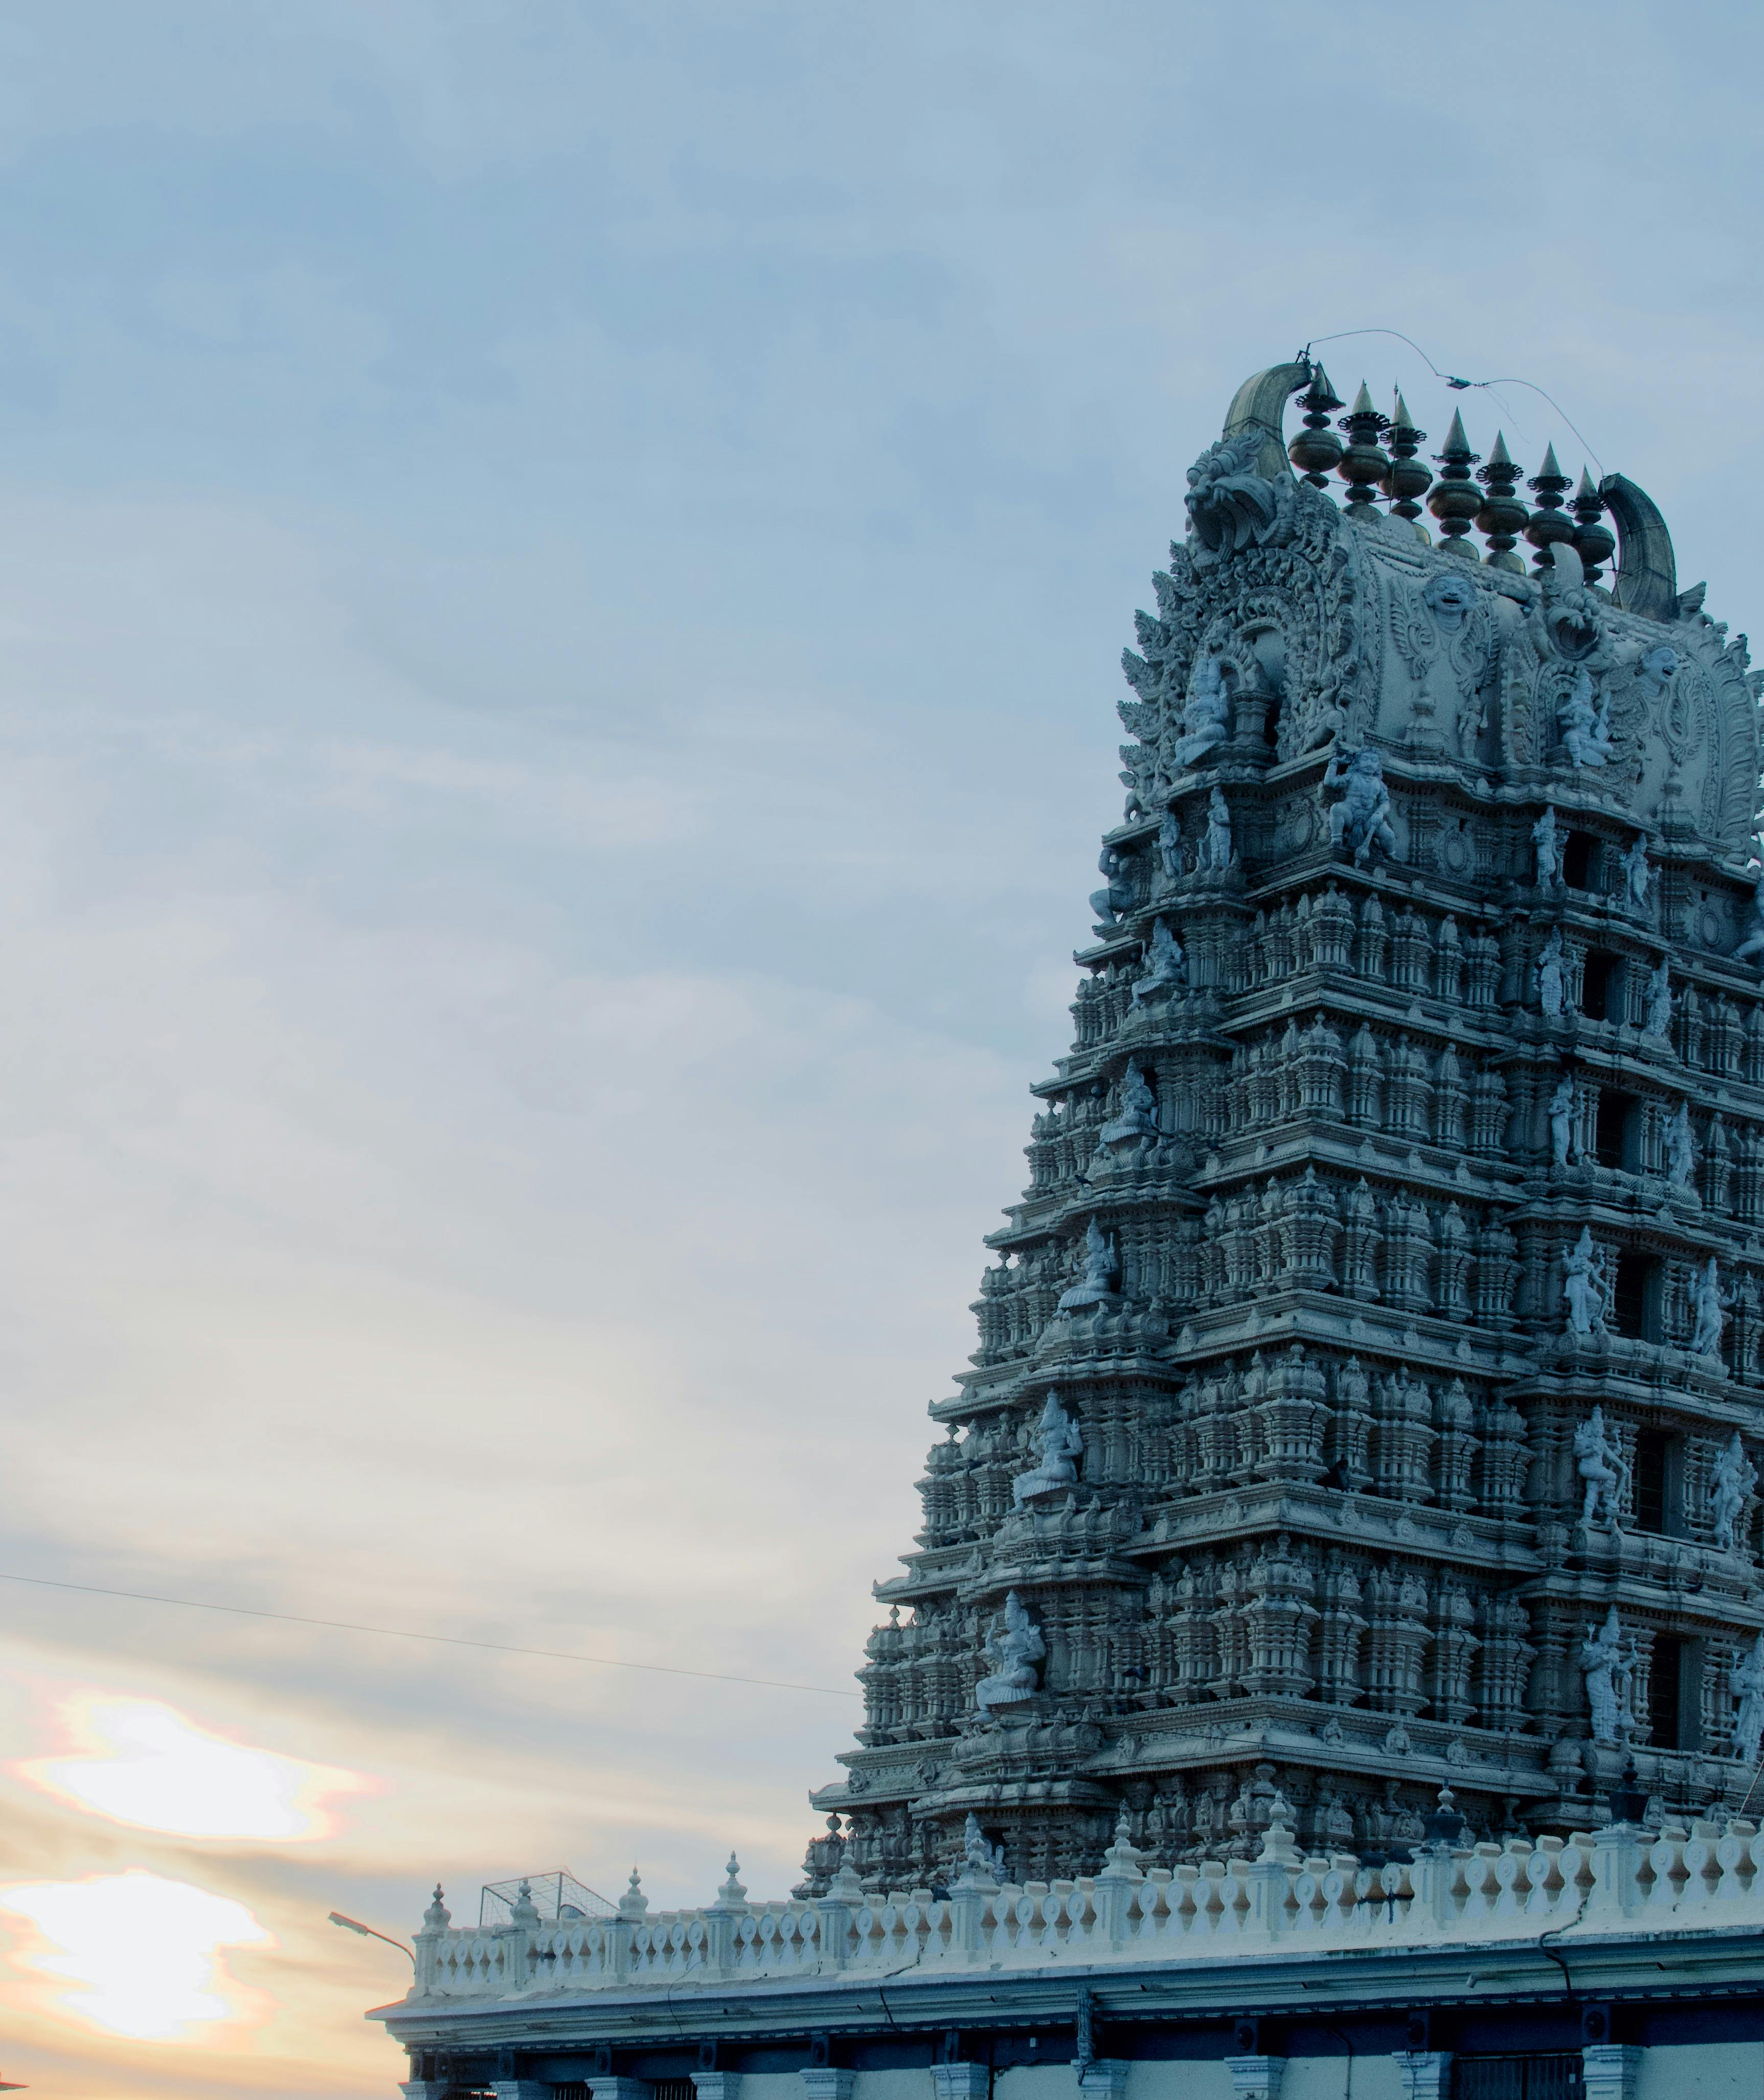 south indian temple background